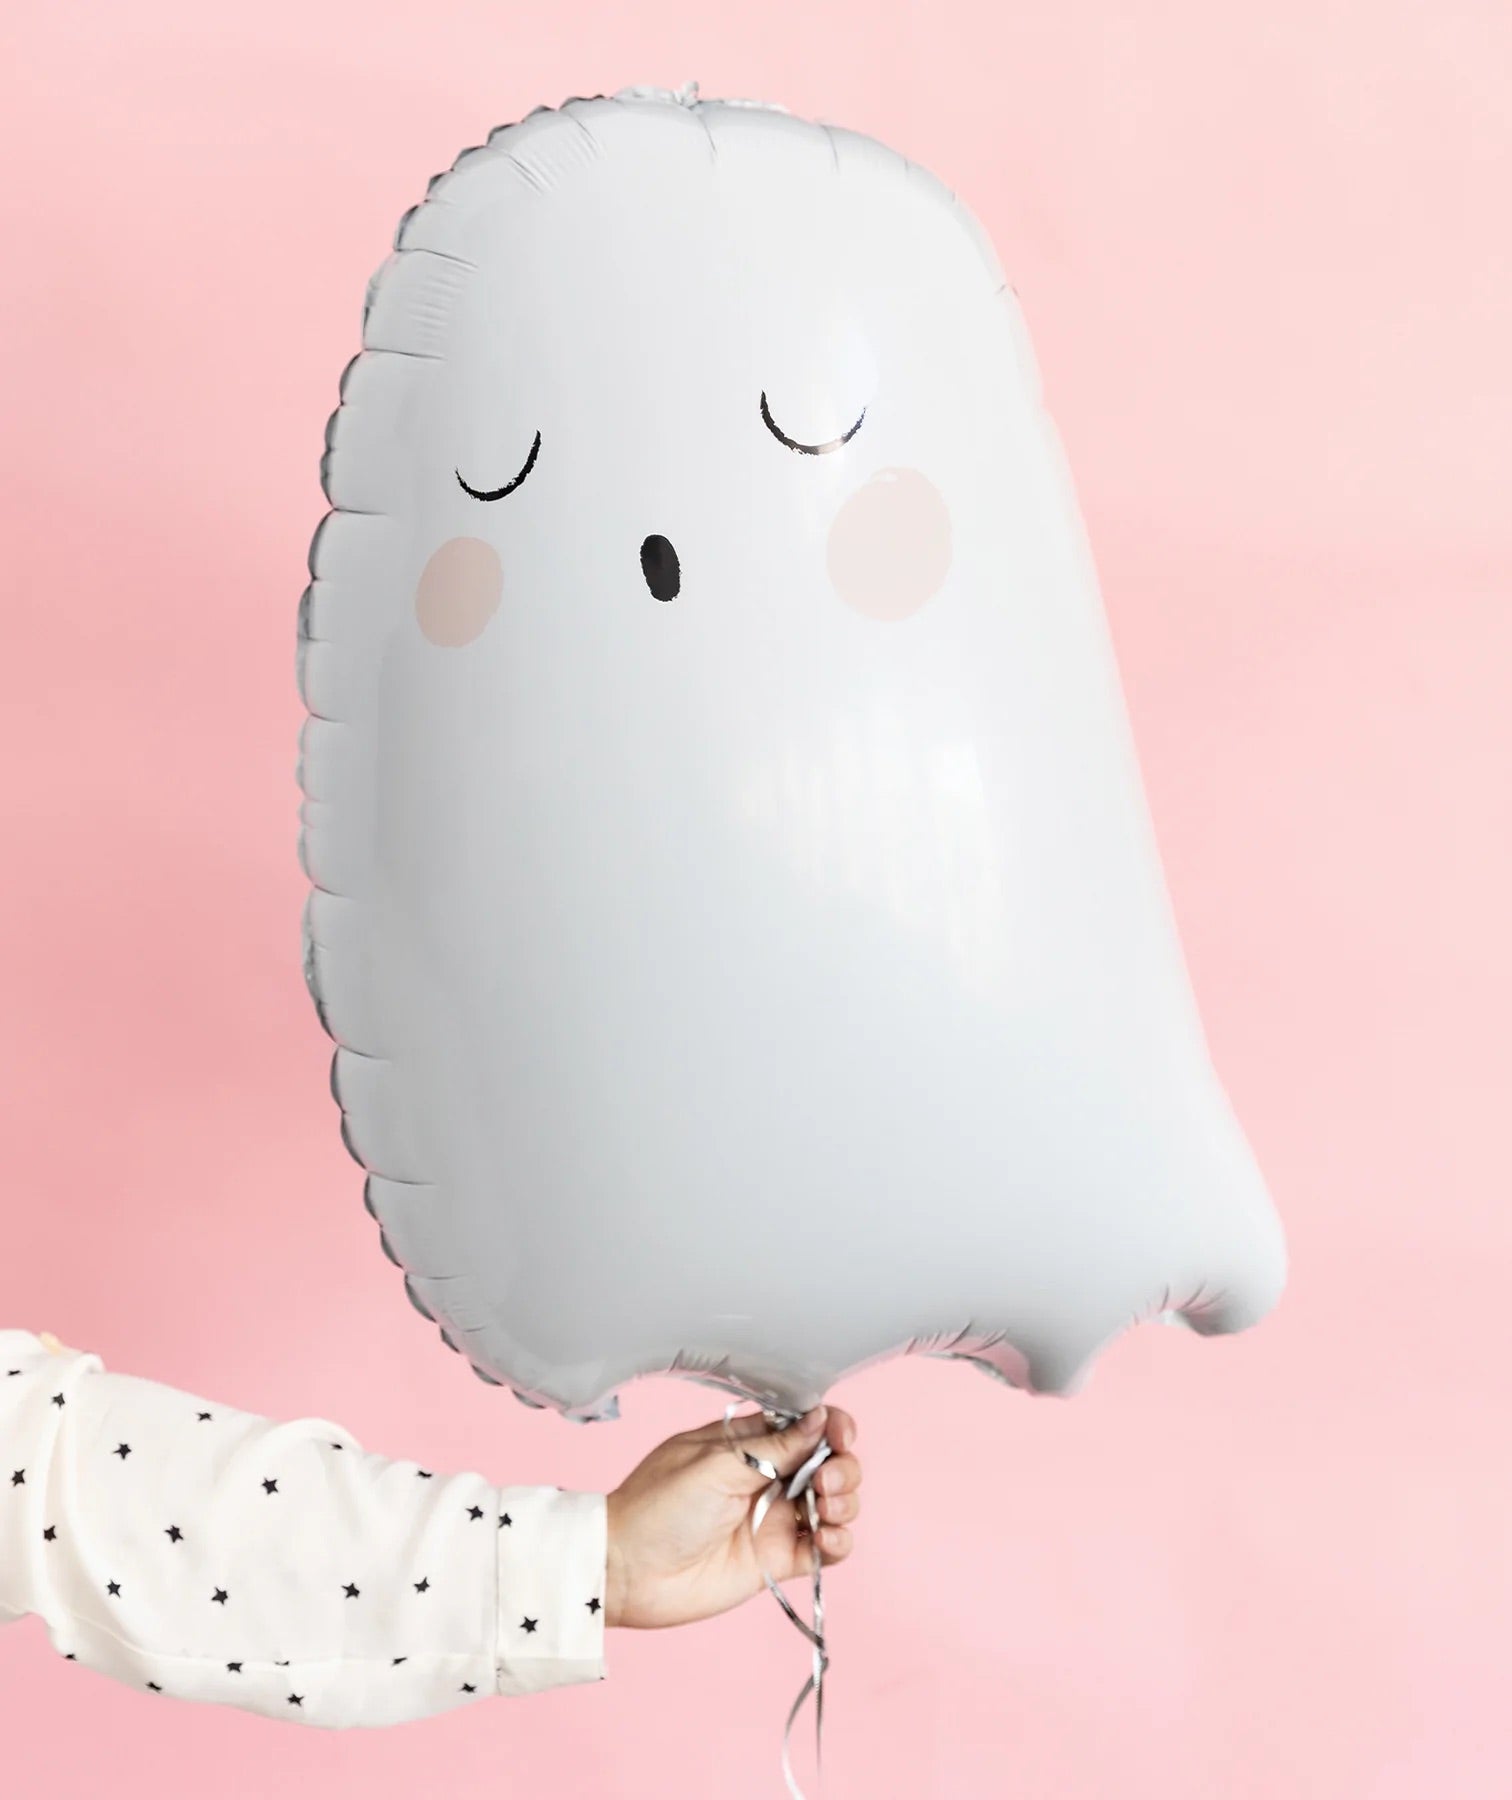 Spooky Cute Halloween Ghost Balloon 26" | The Party Darling